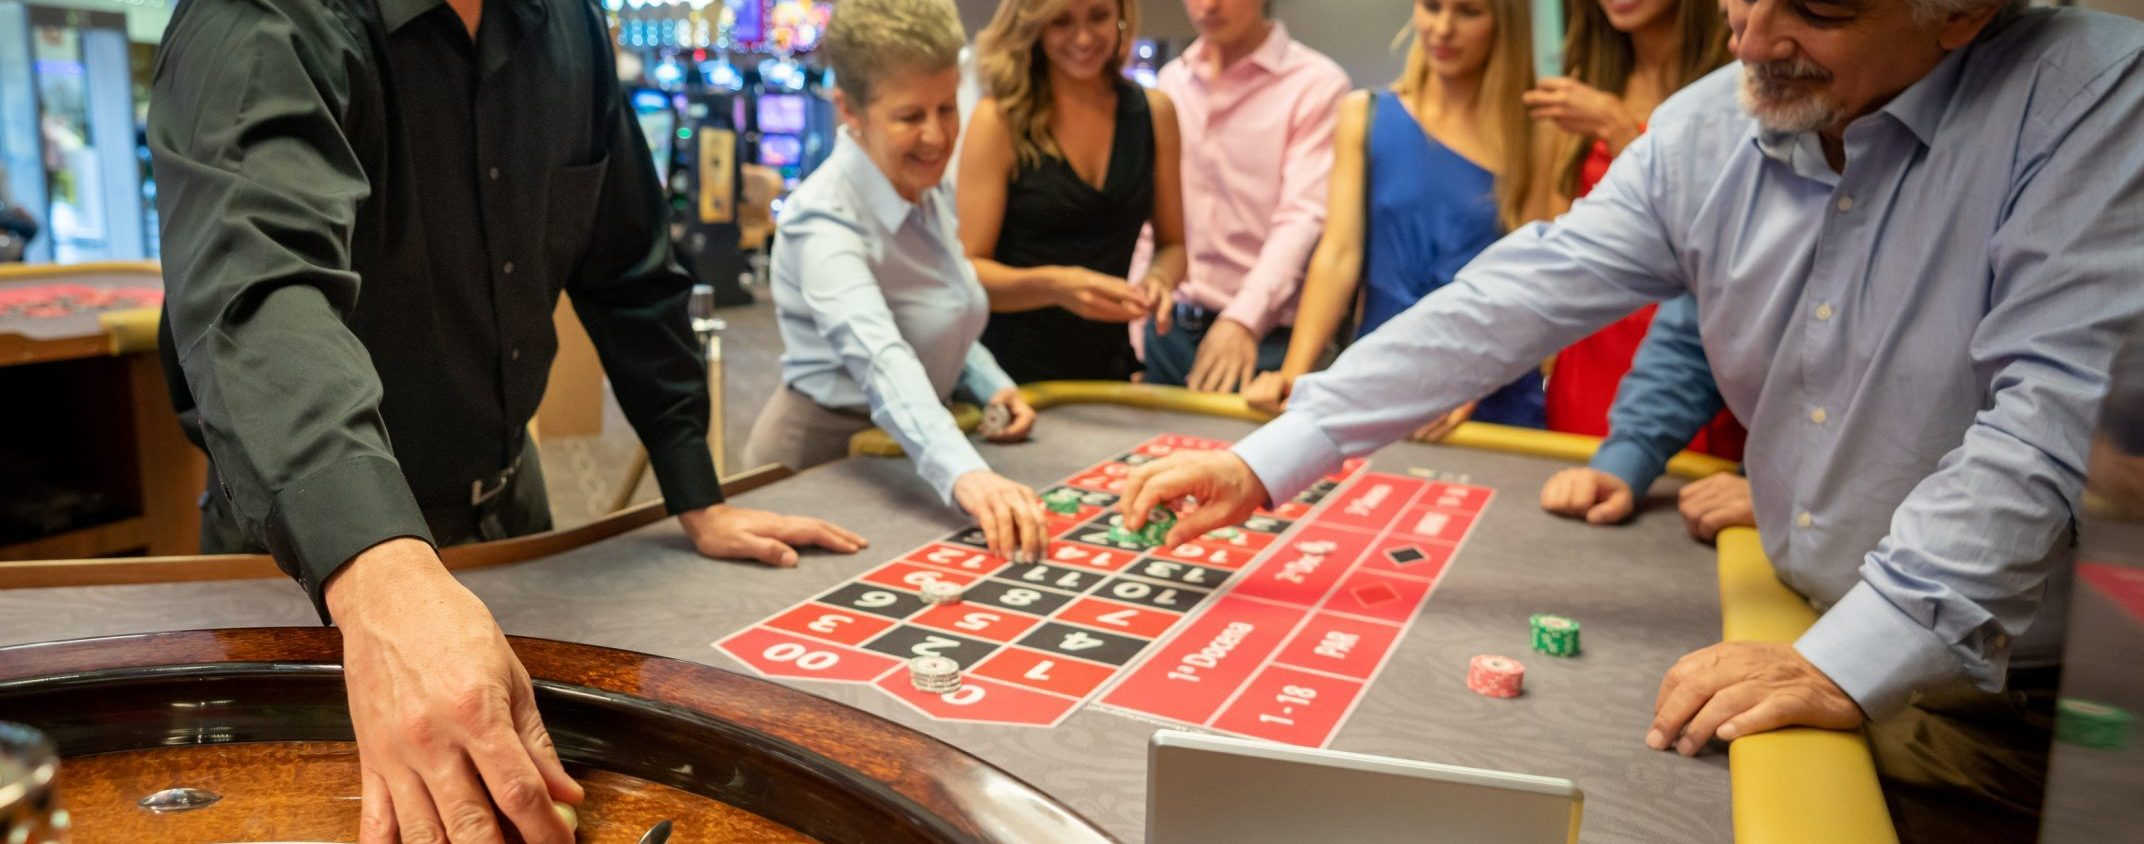 Casino worker ready to release the ball on the roulette wheel while others are still placing bets on table smiling